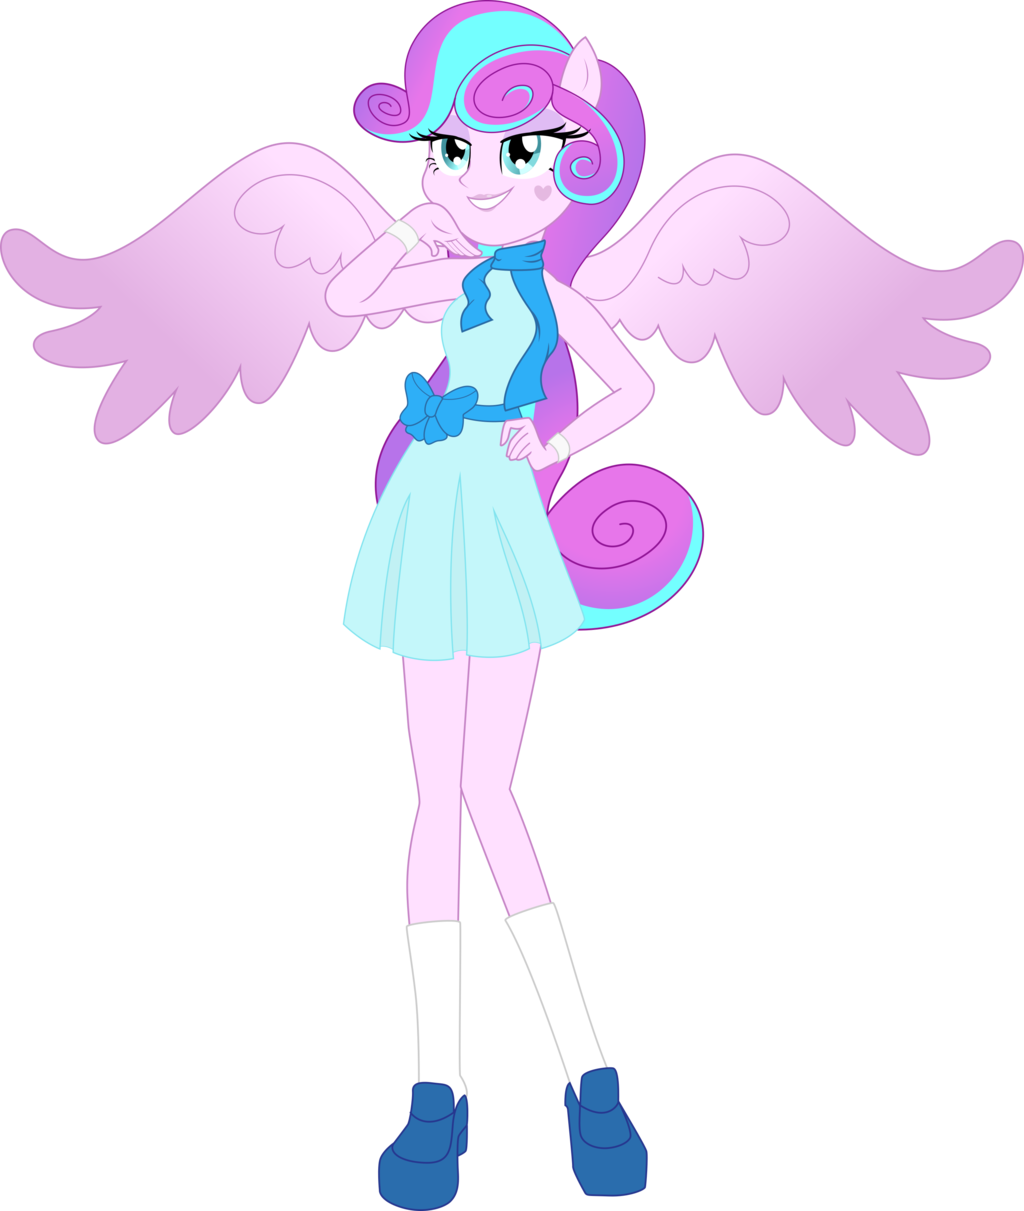 Flurry Heart The Equestria Girl By Theshadowstone Flurry - Flurry Heart Equestria Girls (1024x1211)